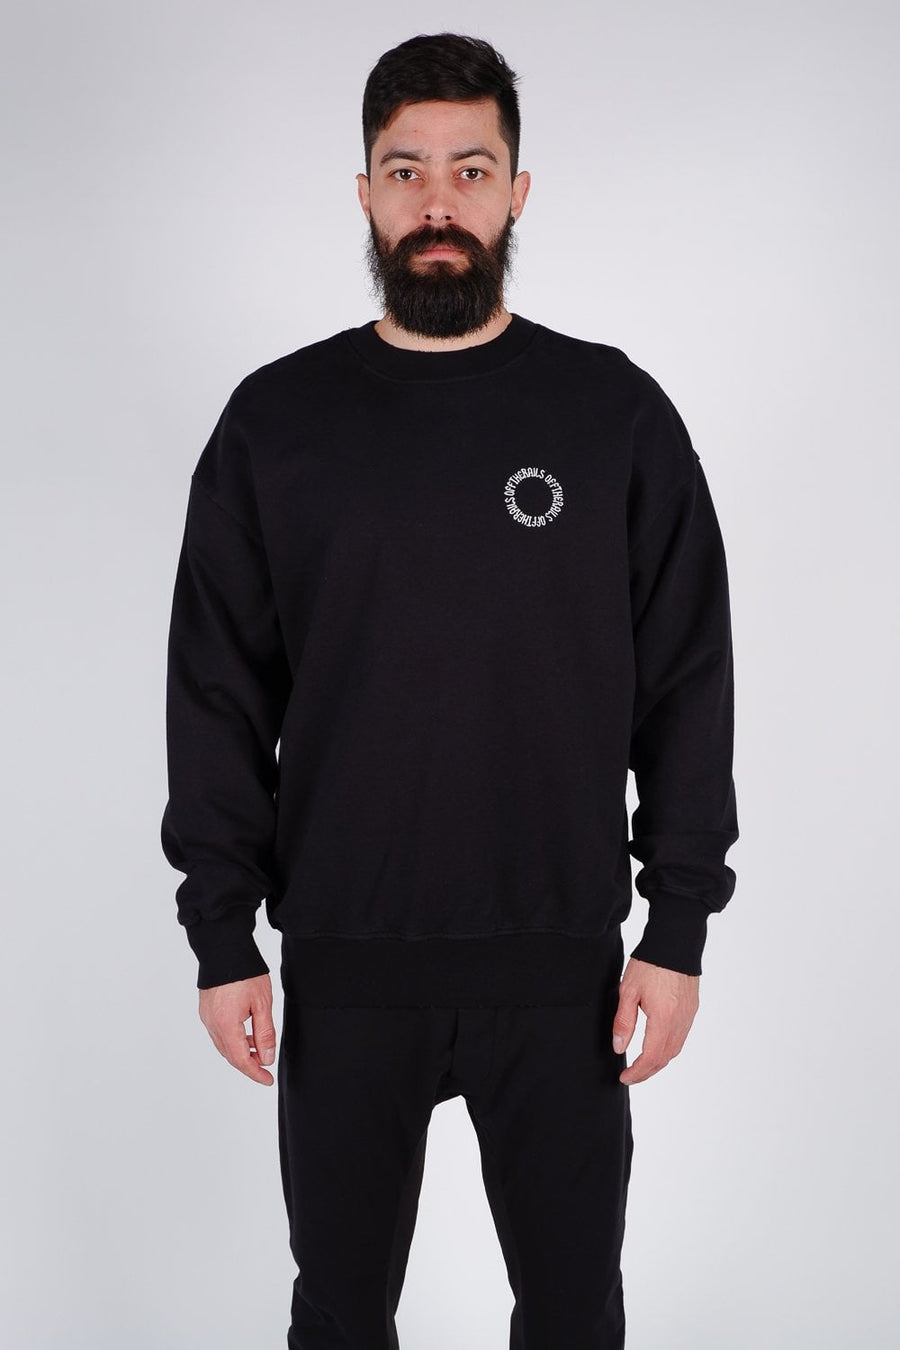 Buy the Off The Rails Target Sweatshirt in Black at Intro. Spend £50 for free UK delivery. Official stockists. We ship worldwide.